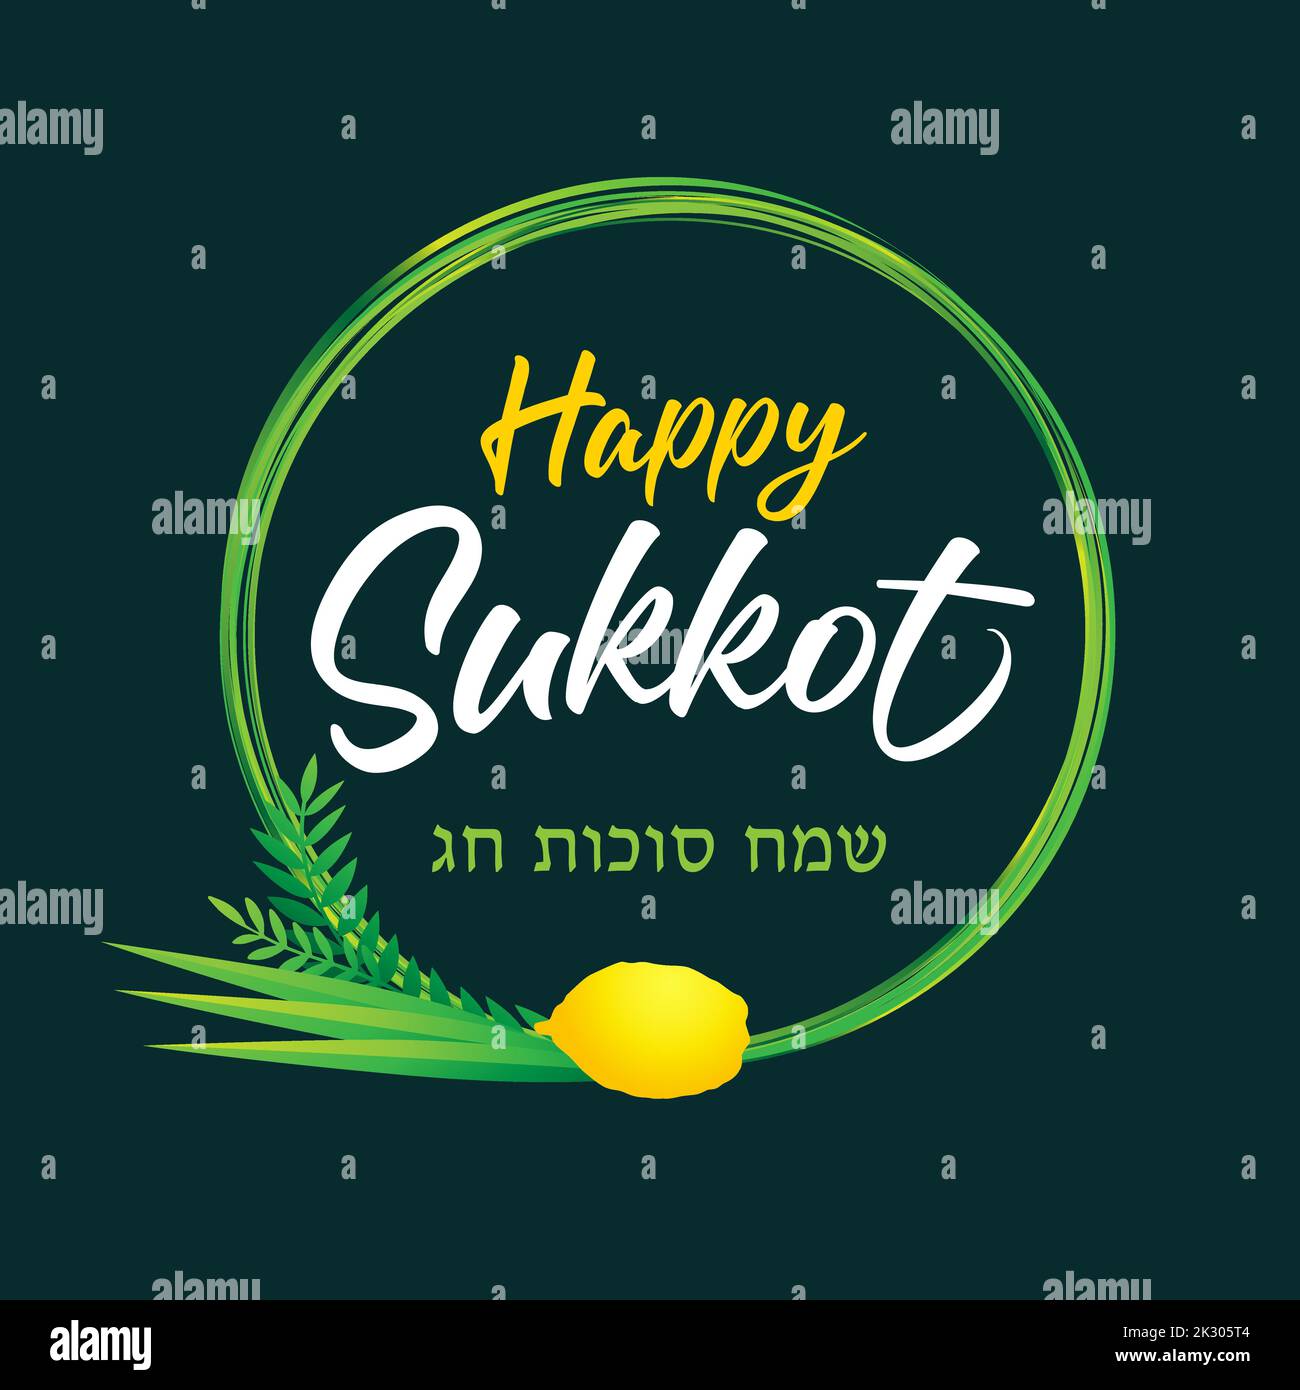 Happy Sukkot lulav and round wreath on green. Jewish Holiday card with vector hand drawn design etrog, lulav, hadas, arava and decoration frame Stock Vector